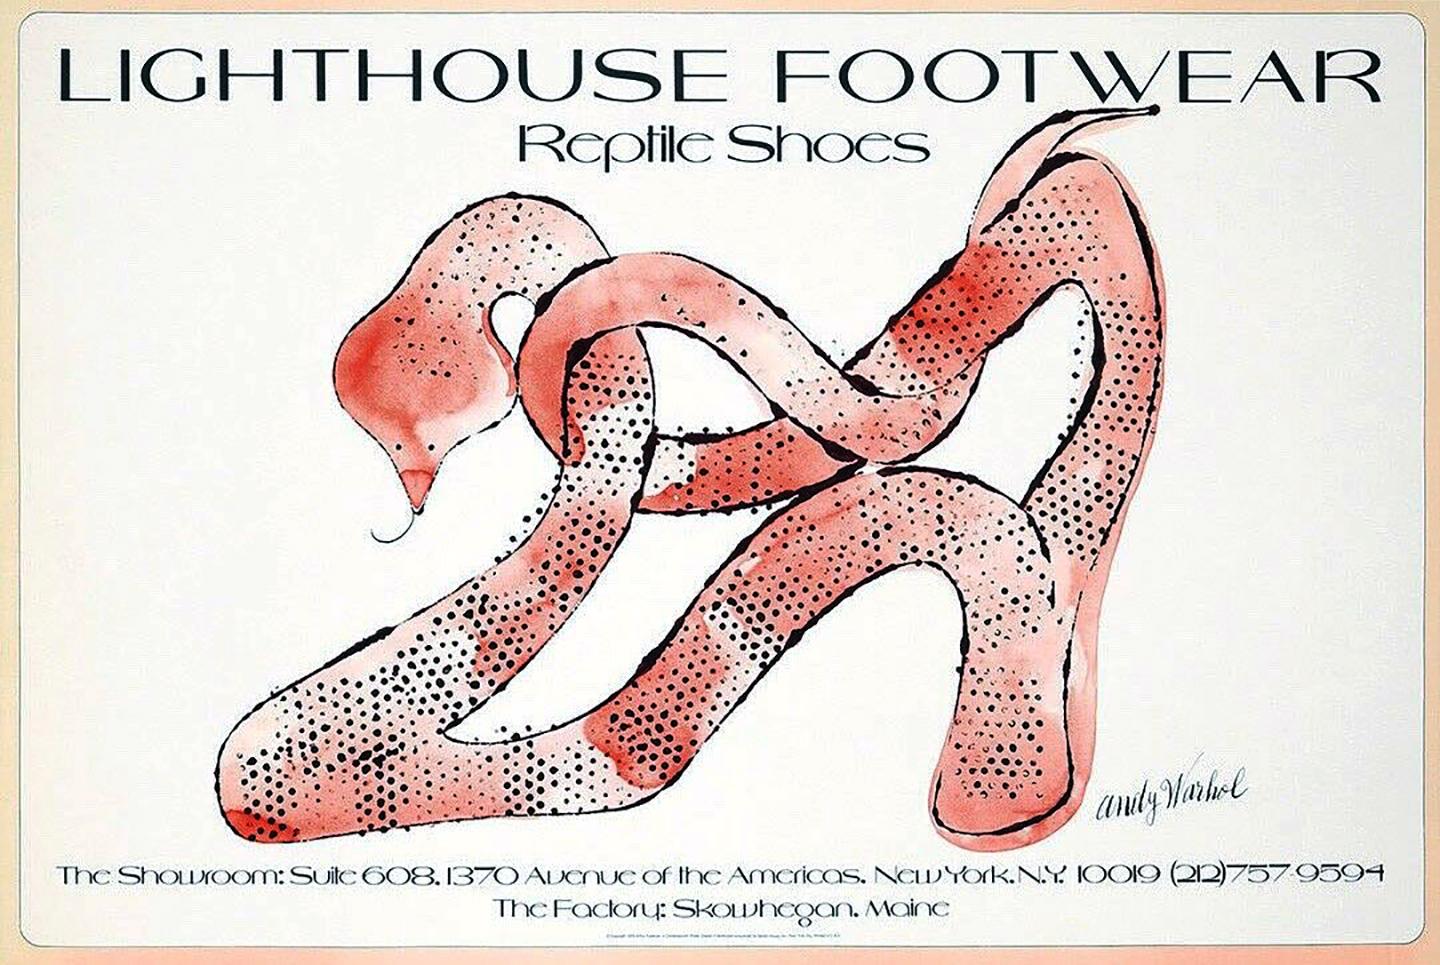 Andy Warhol illustrated advertising poster New York, 1979:
1970s Andy Warhol illustrated "Lighthouse Footwear Reptile Shoes," poster (New York, 1979). An elegant & well-sized vintage Andy Warhol poster executed during the artist’s lifetime. Warhol